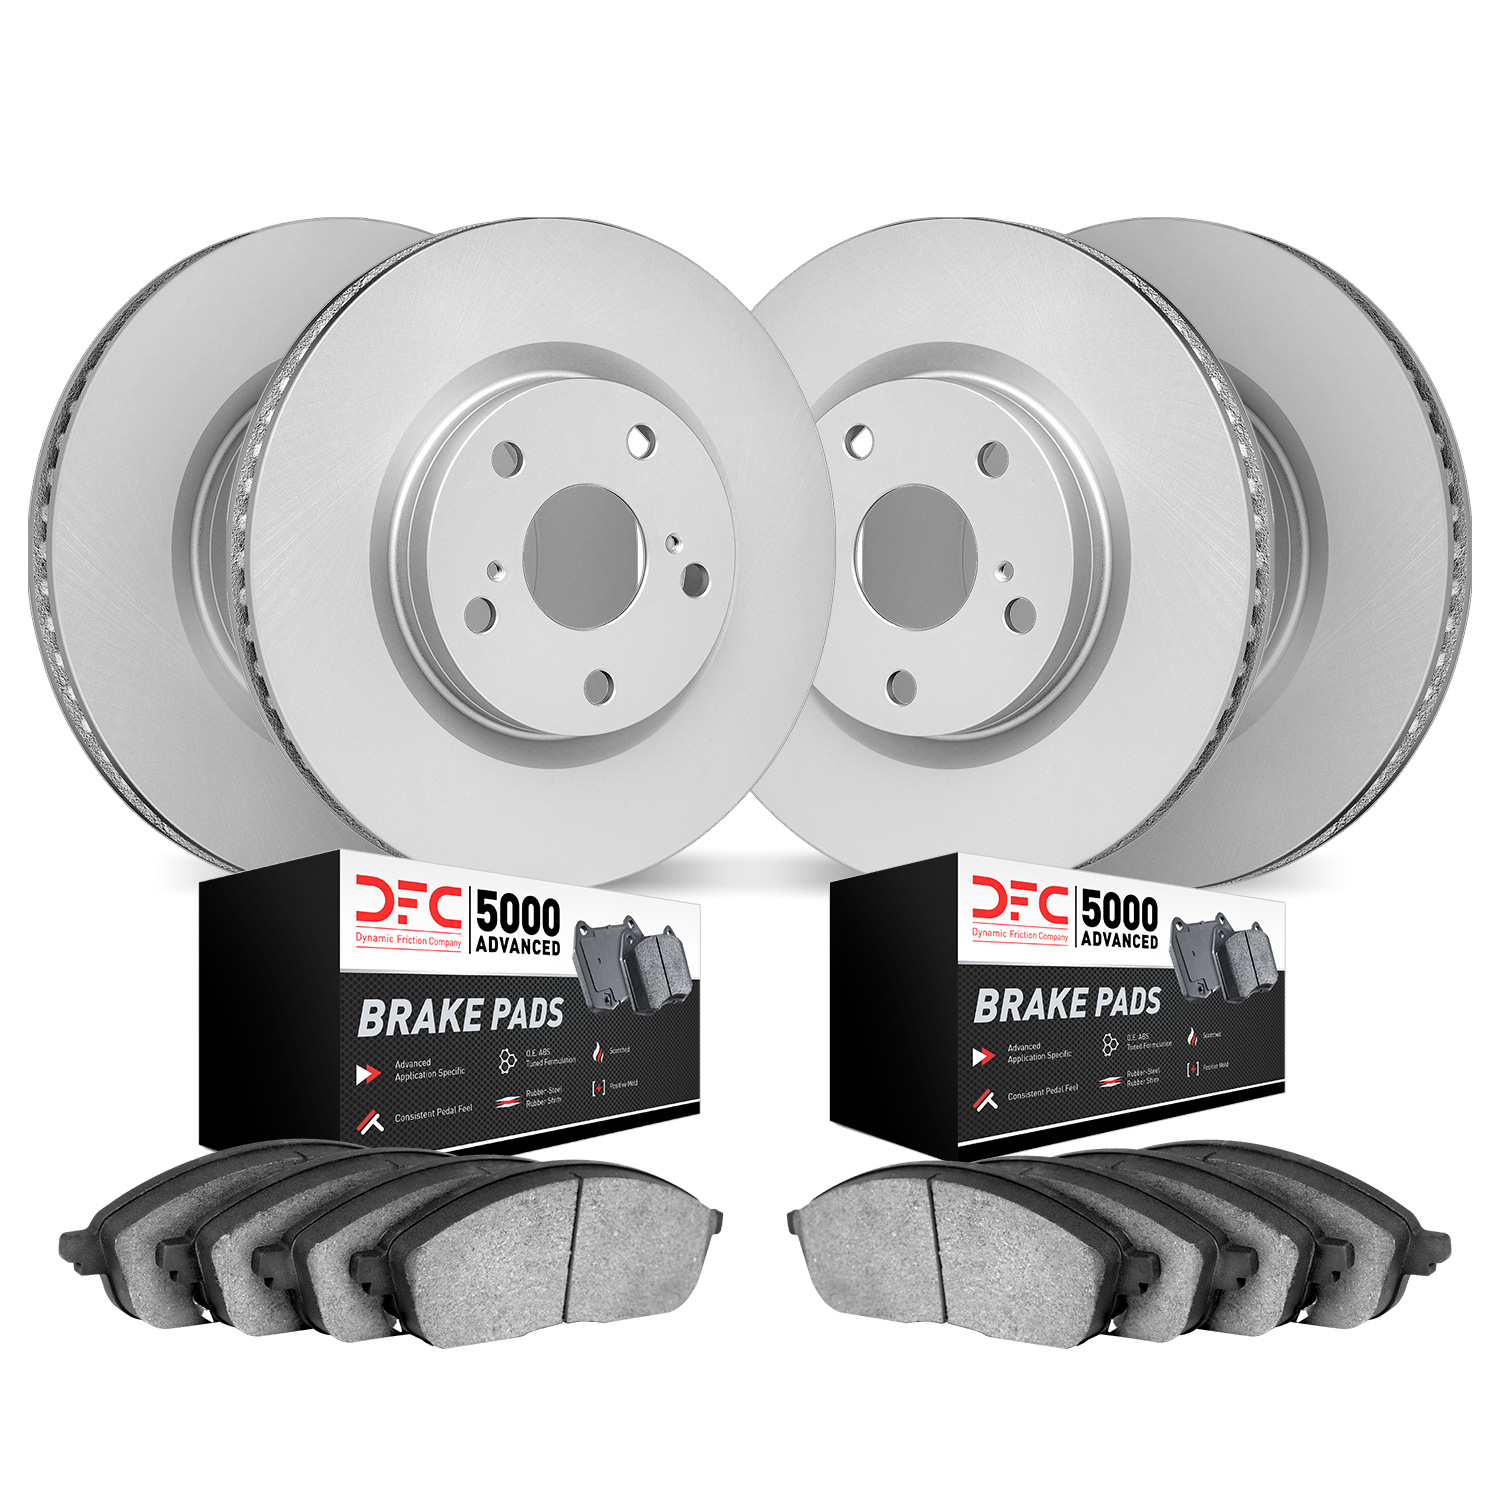 4504-47151 Geospec Brake Rotors w/5000 Advanced Brake Pads Kit, Fits Select GM, Position: Front and Rear